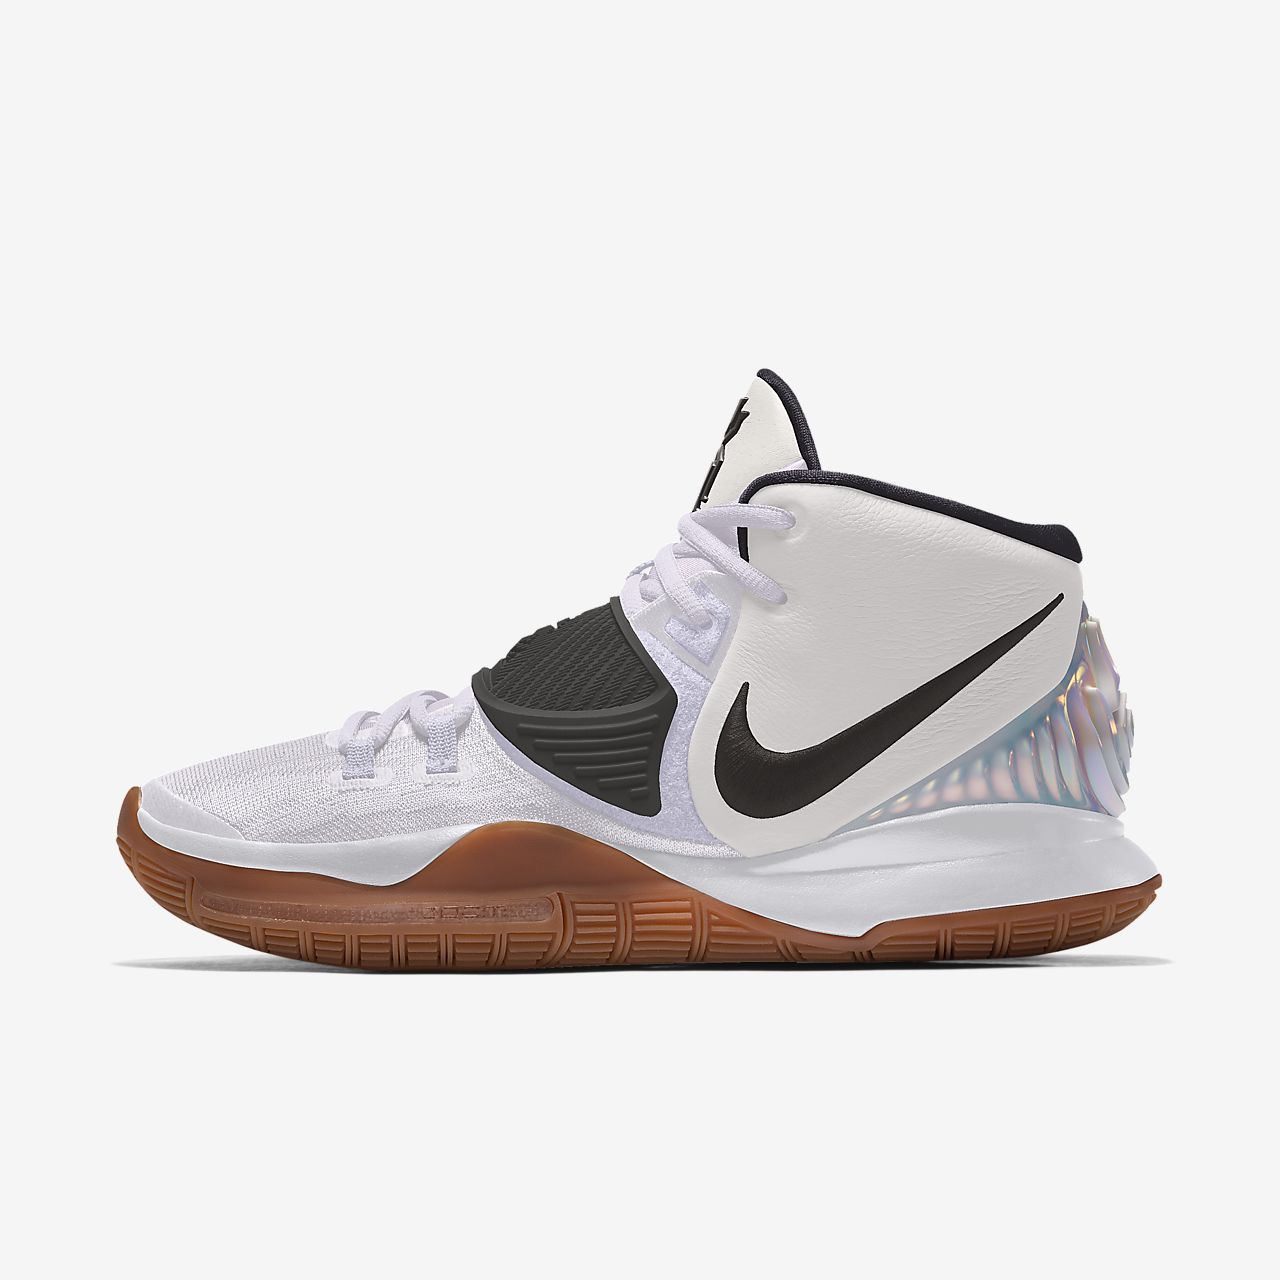 nike kyrie 6 basketball shoes cheap online